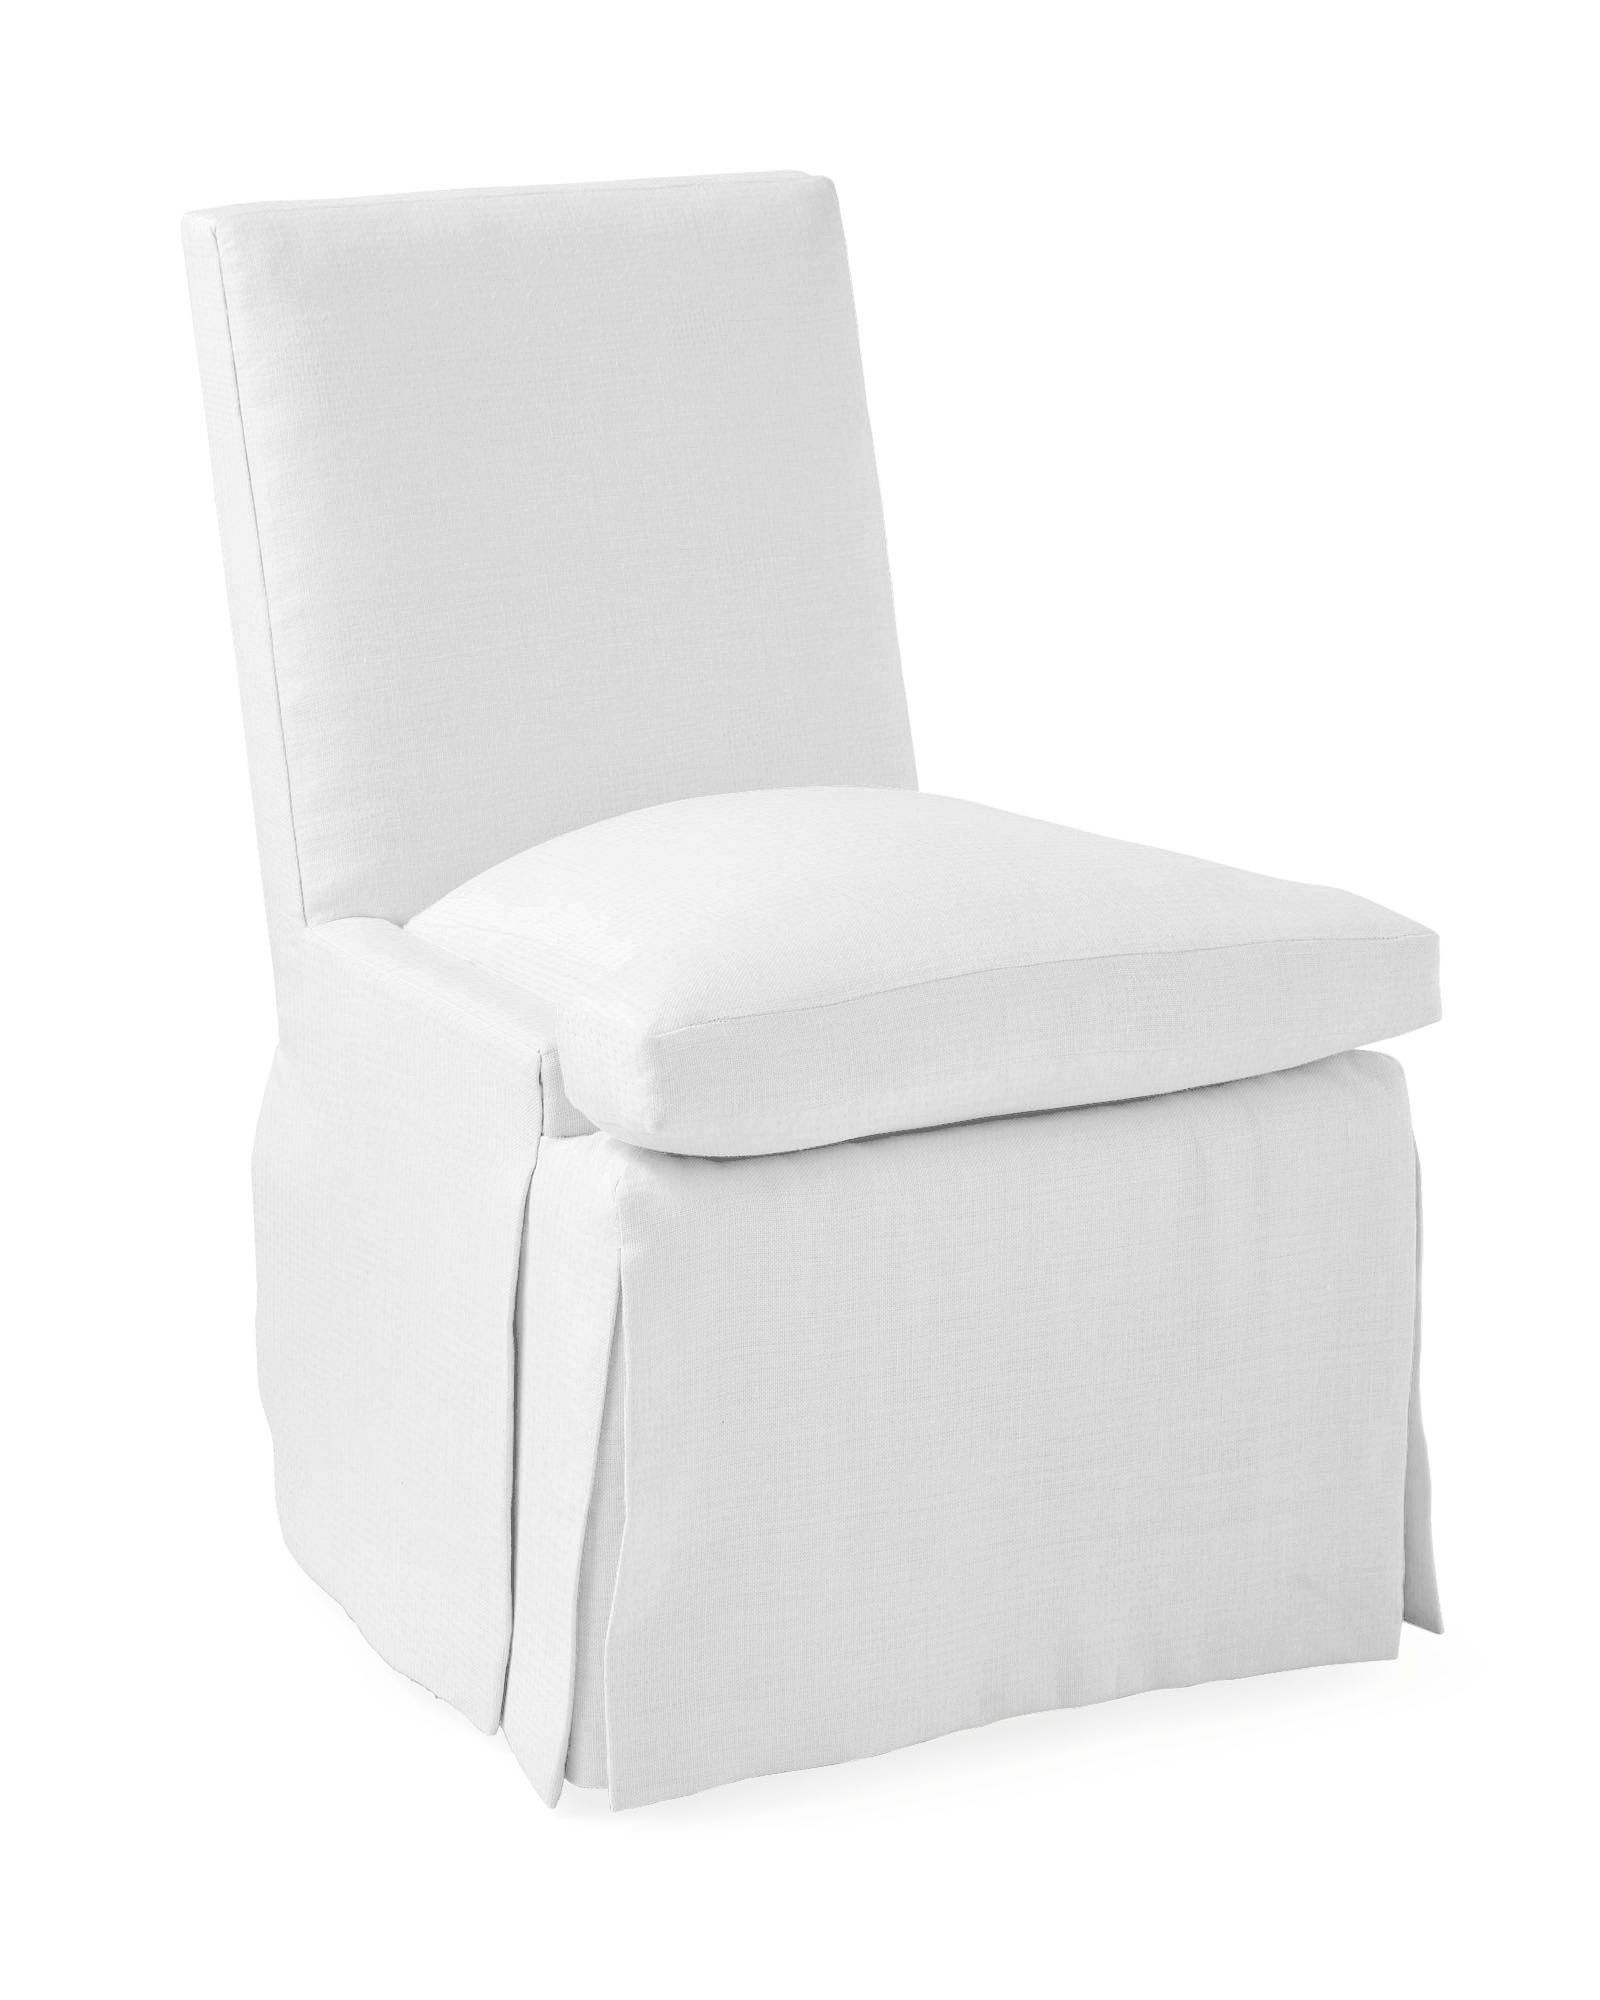 Belvedere Dining Chair | Serena and Lily